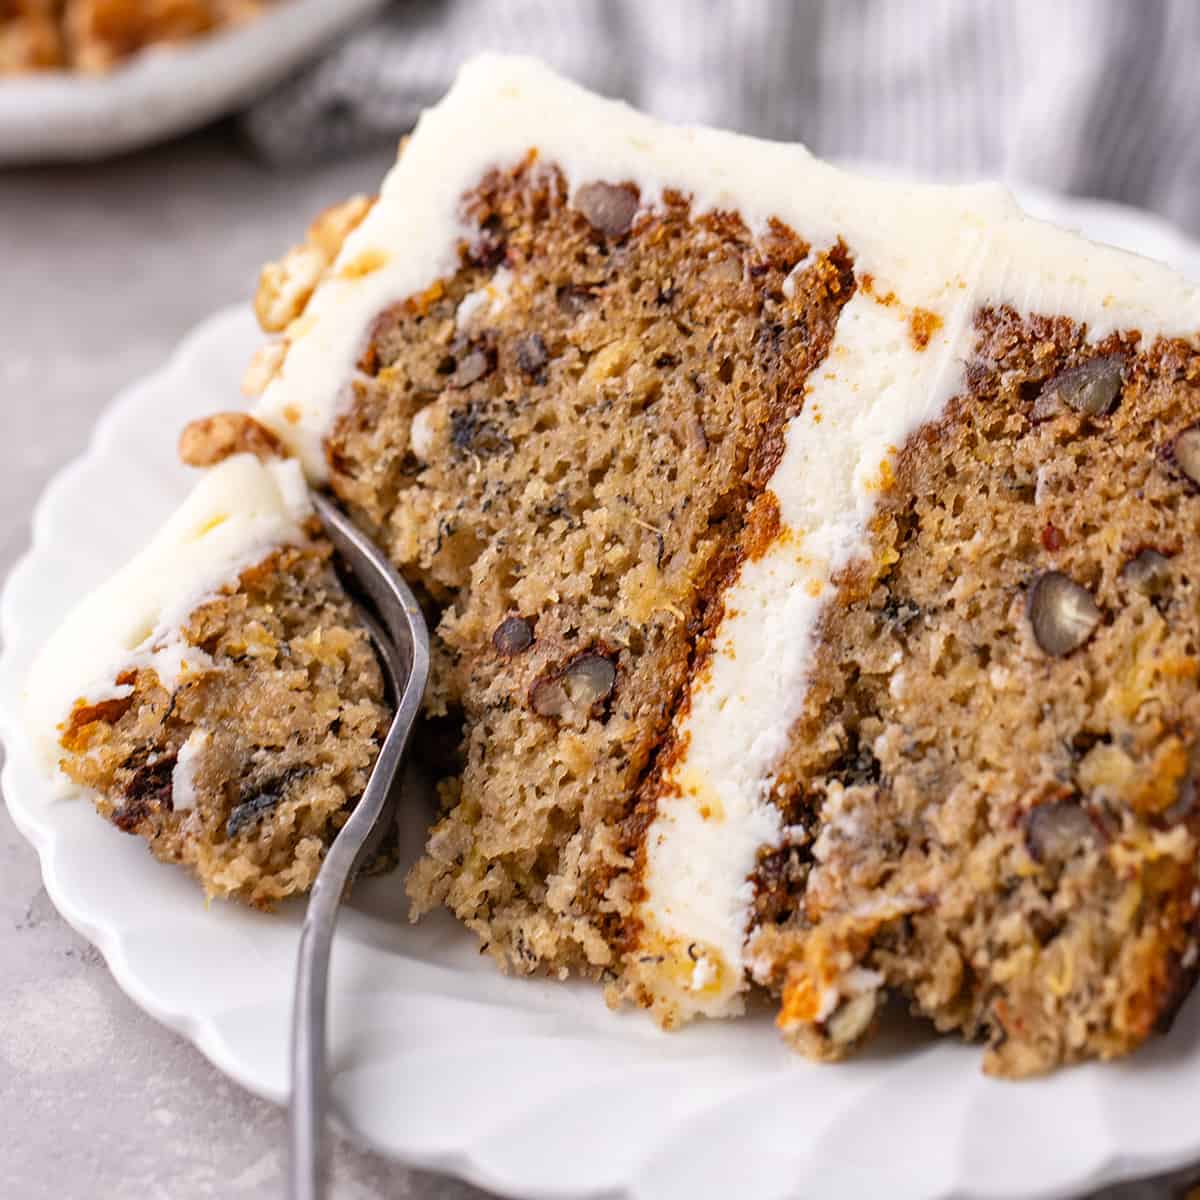 hummingbird cake on a plate with a fork taking a bite out of it